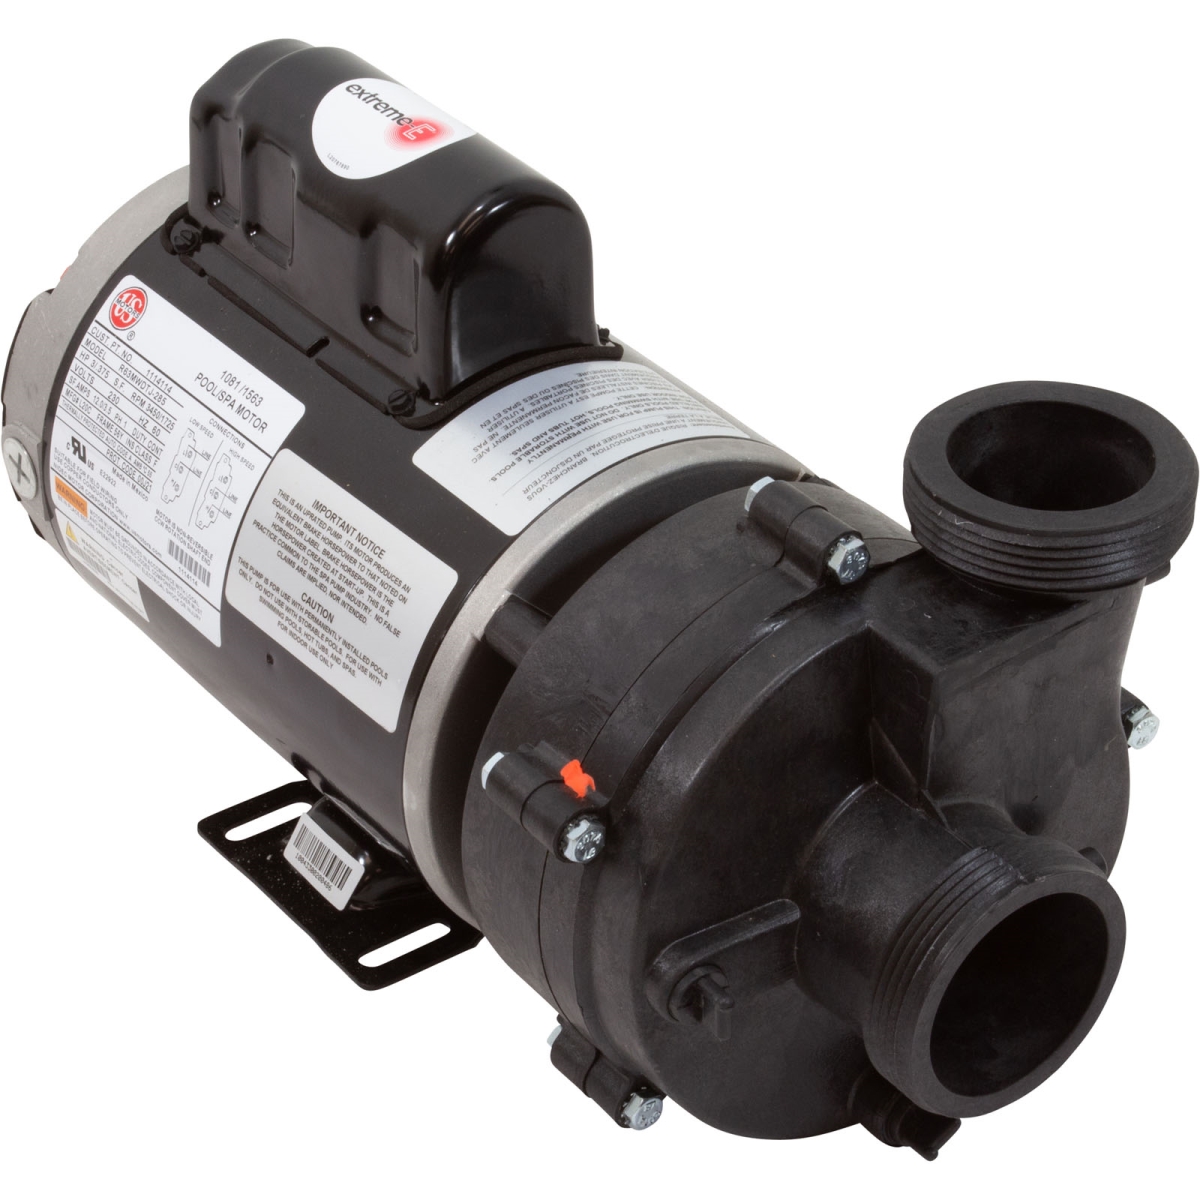 5235212-S 2 in. In & Out 230V 56 Frame 4 HP 12-3.5A Ultimax Style Wetend Balboa Pump -  Spa Parts